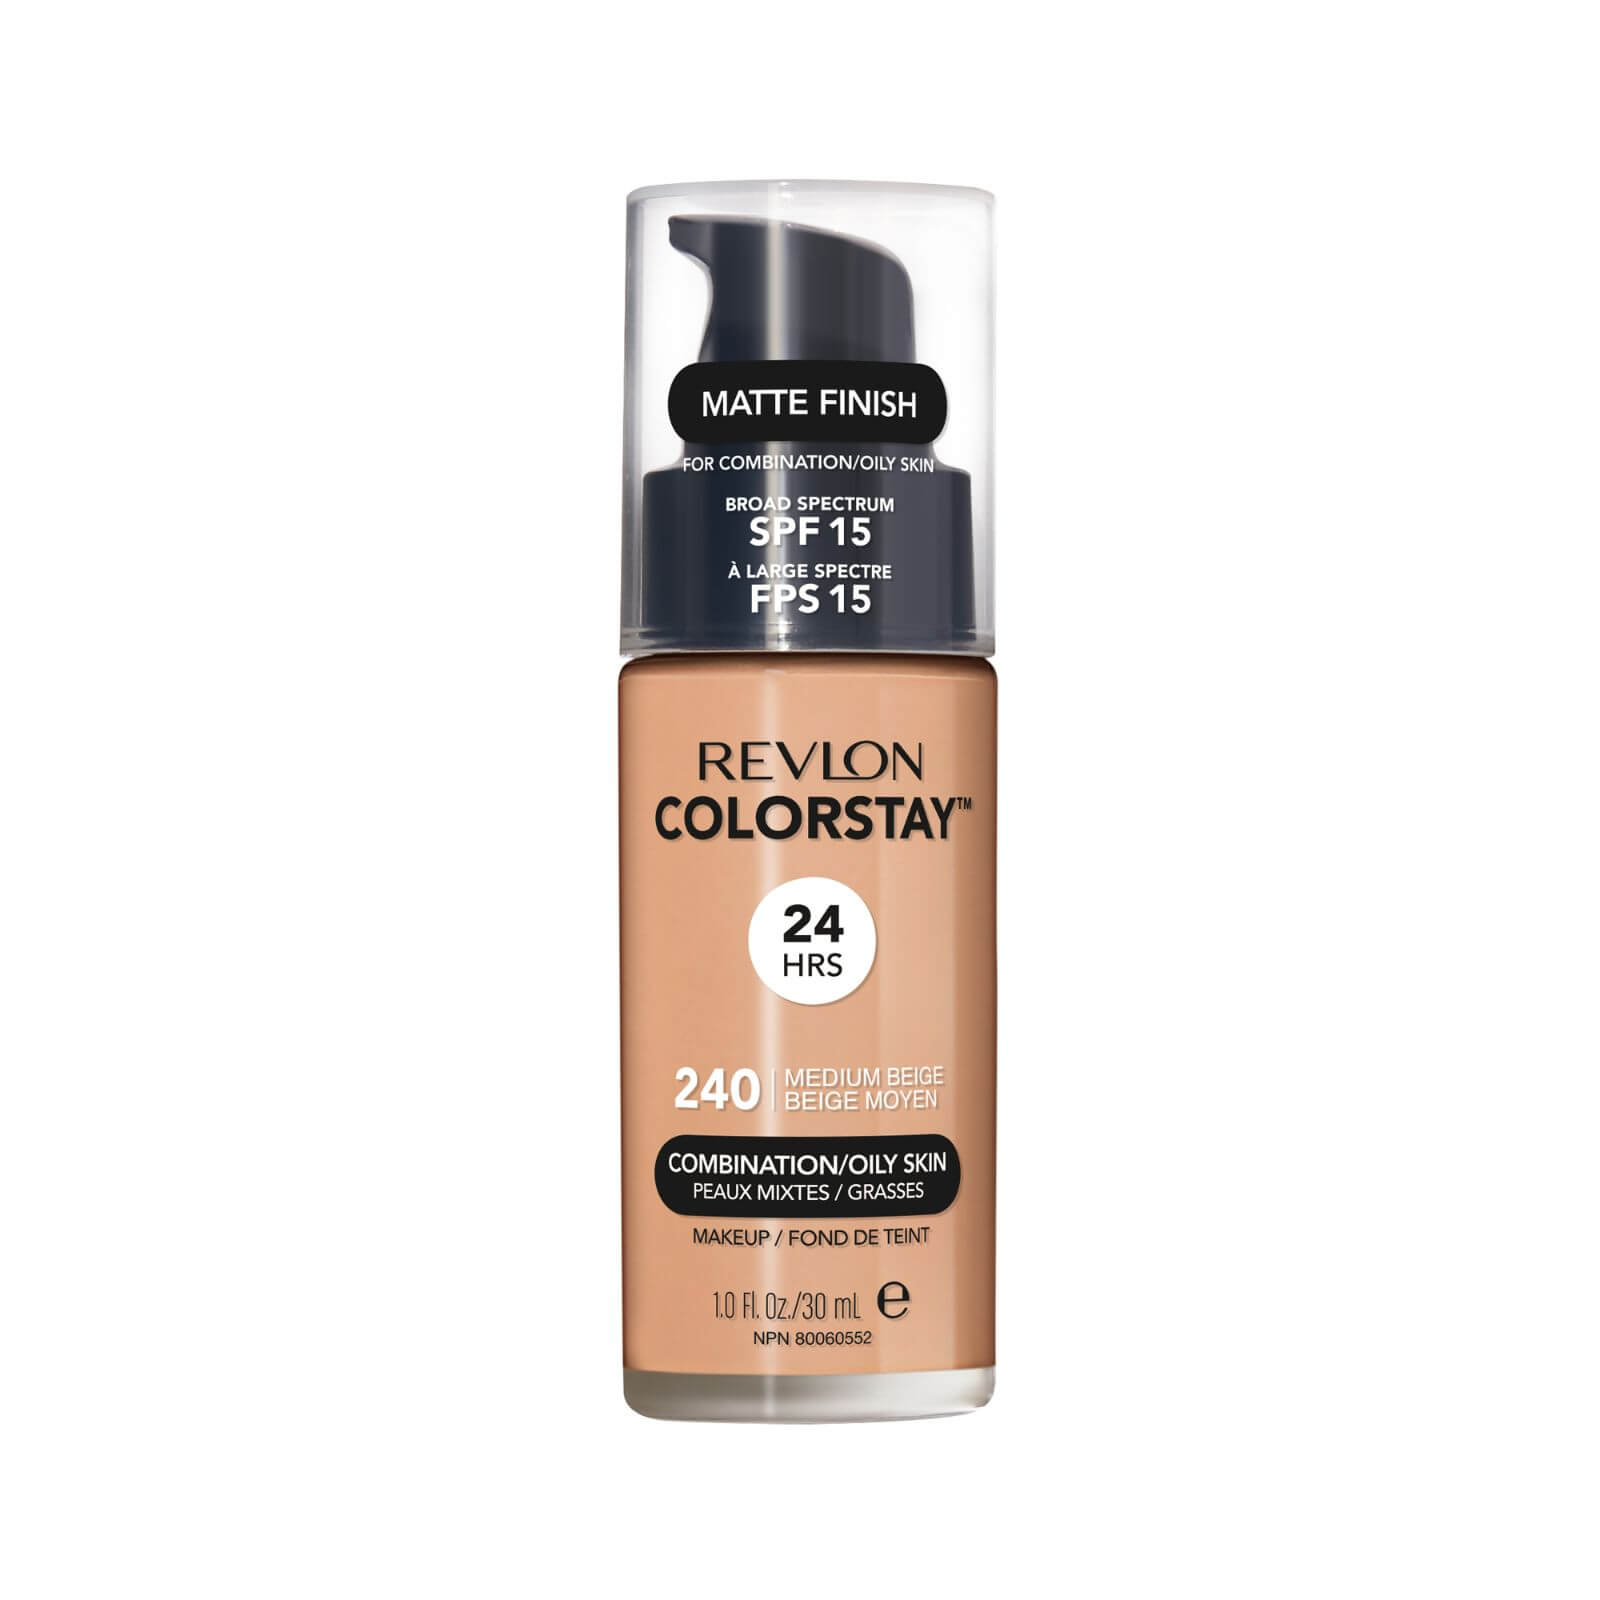 Revlon ColorStay Make-Up Foundation for Combination/Oily Skin (Various Shades) - Medium Beige